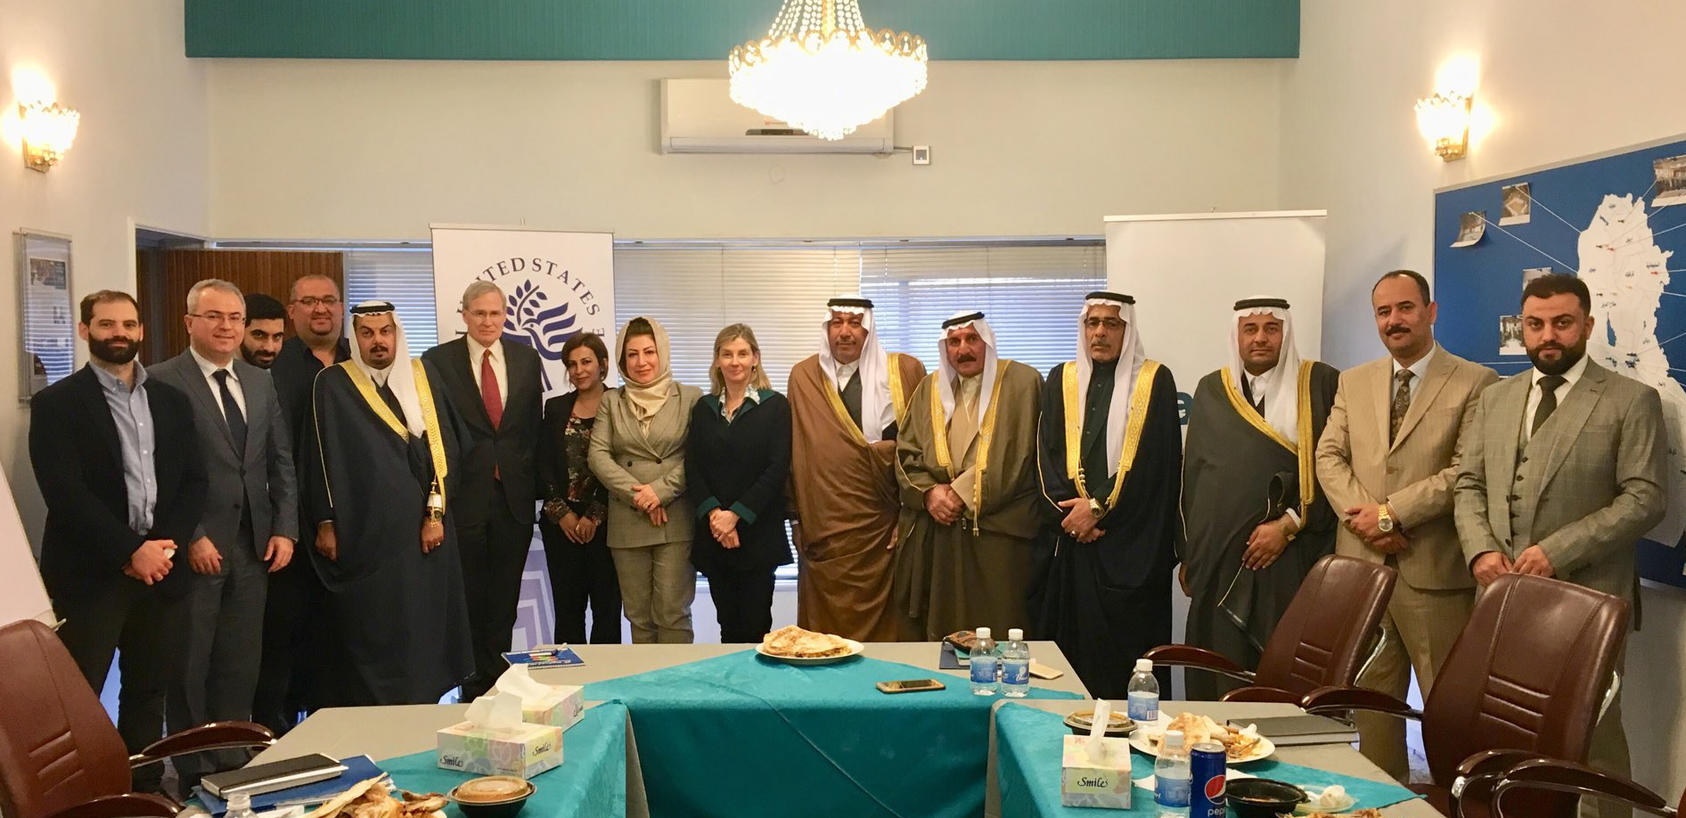 USIP and Sanad staff, tribal sheikhs, and the Network of Iraqi Facilitators—together they brokered an agreement in Hawija to resolve disputes without violence and rebuild social fabric in communities ravaged by ISIS